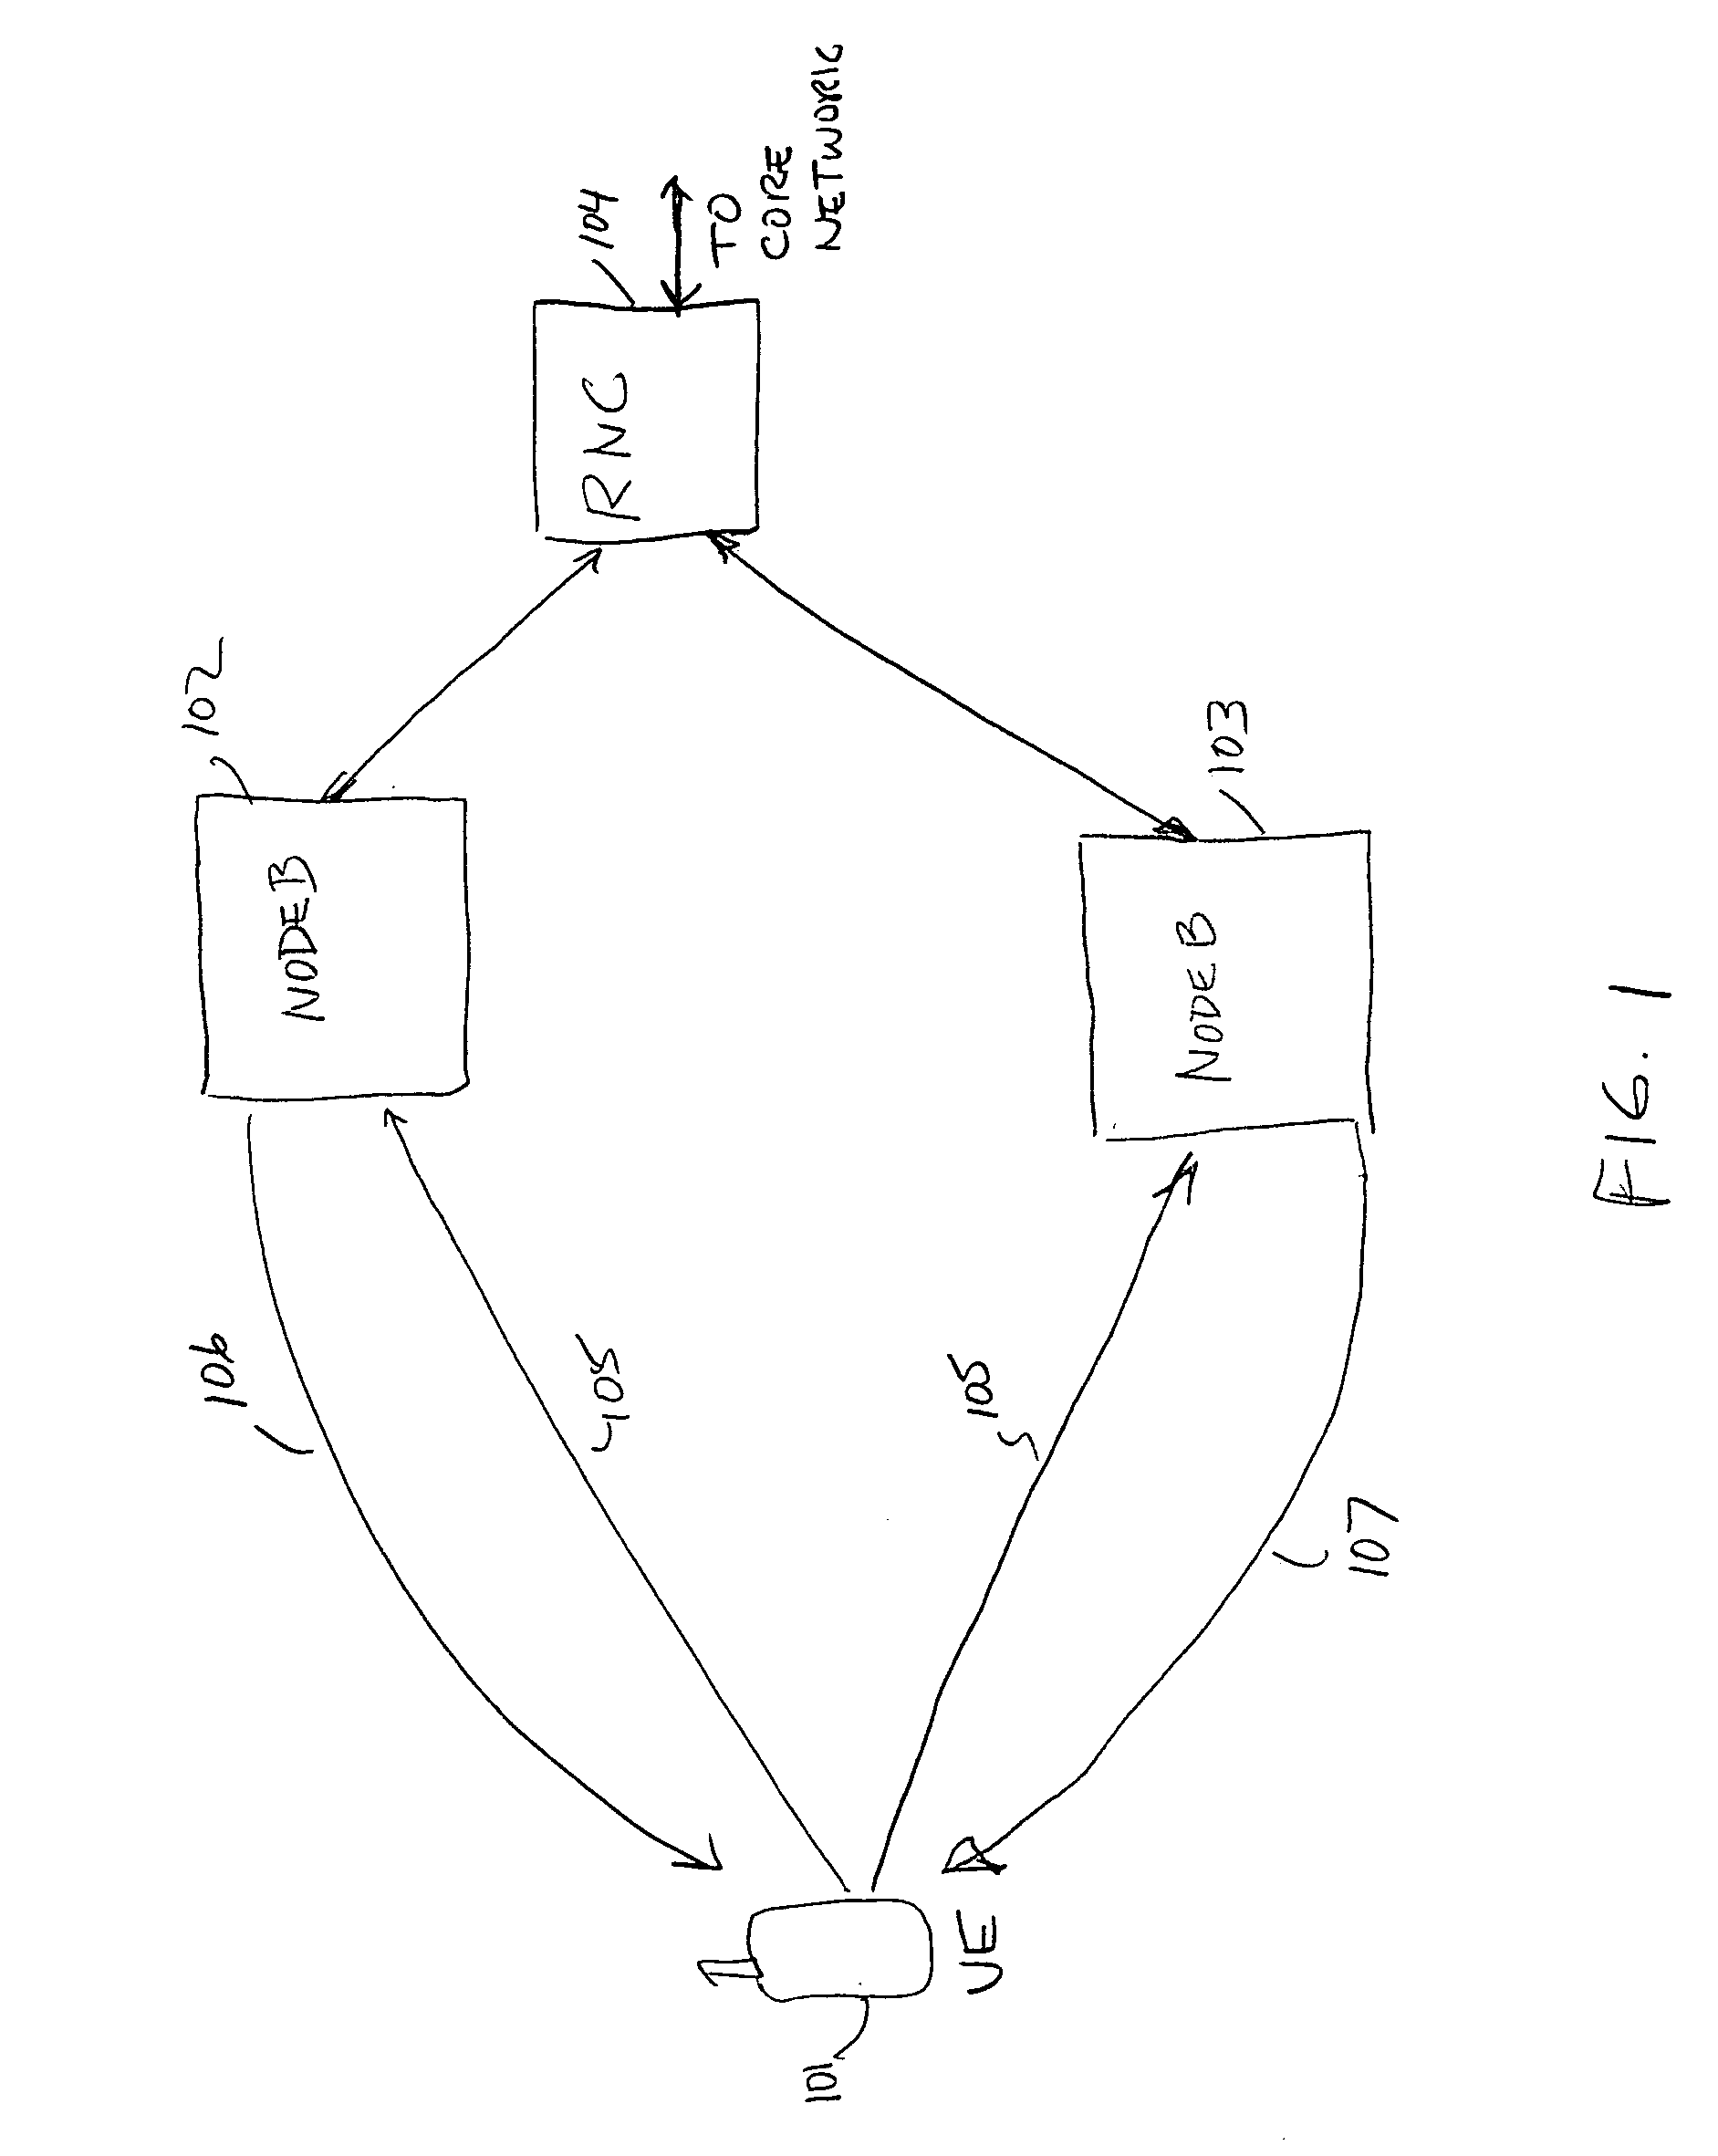 Method of increasing the capacity of enhanced data channel on uplink in a wireless communications systems